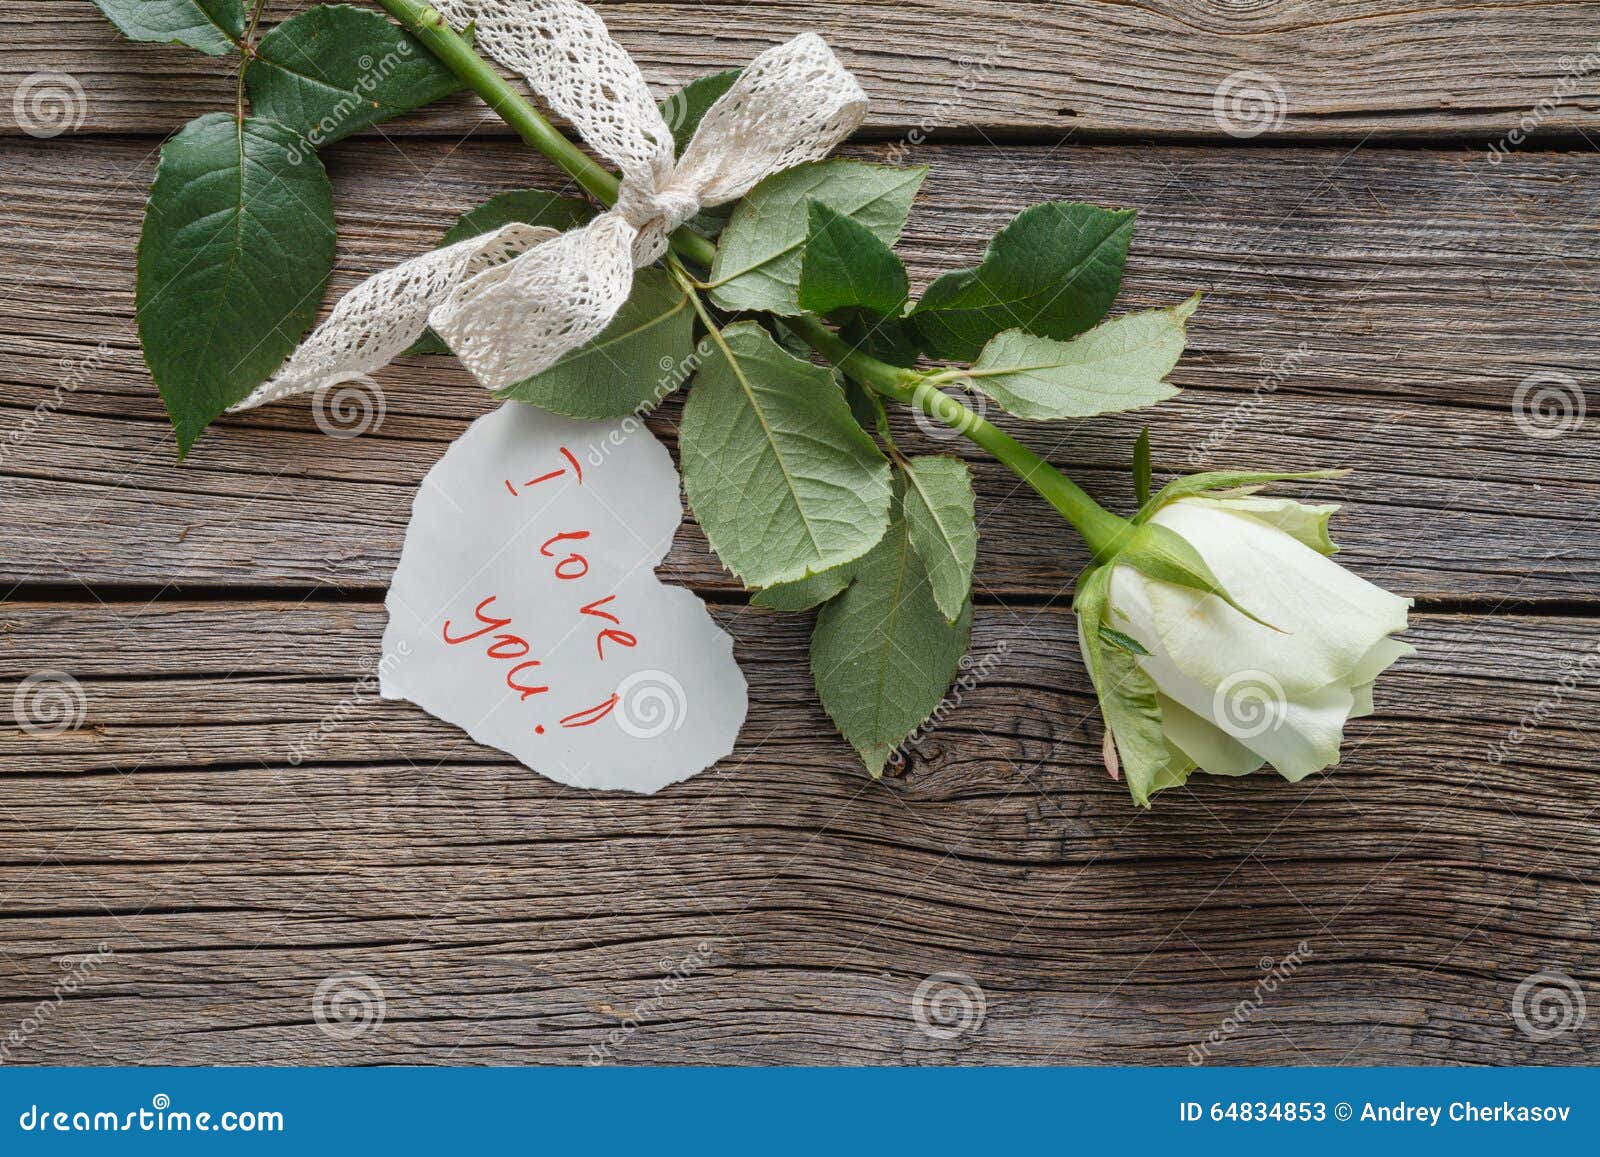 White Rose with Love Message Stock Image - Image of card ...